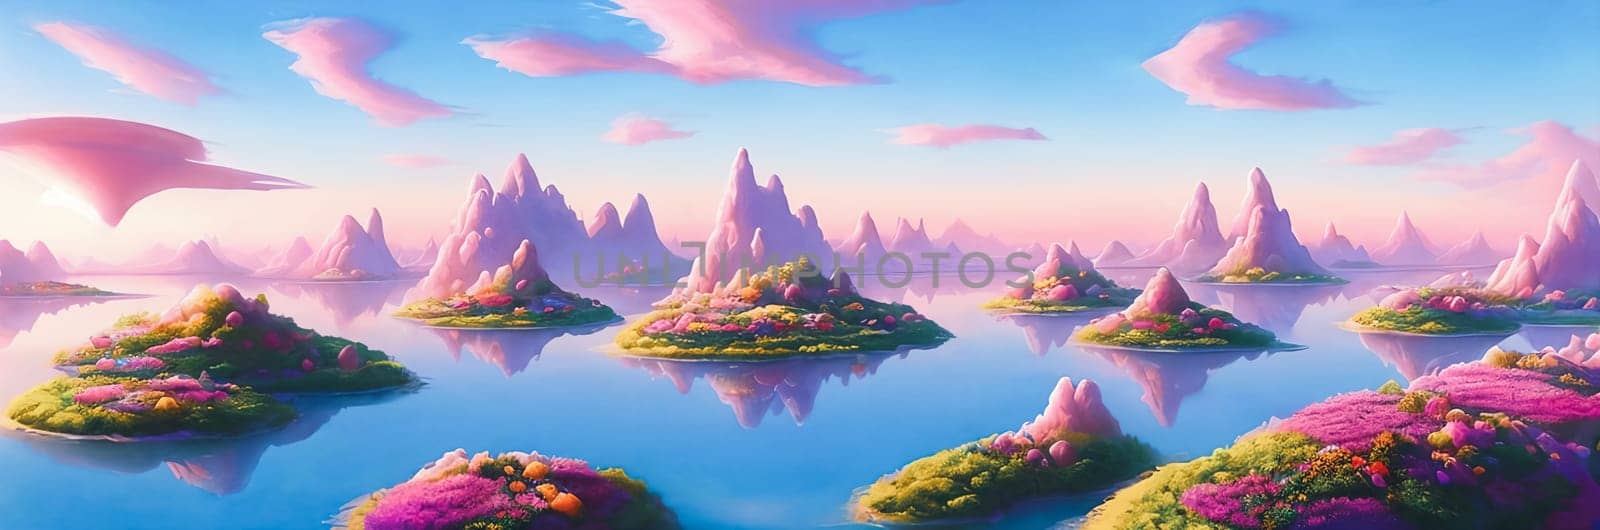 Surreal and dreamlike landscape of floating islands suspended in a pastel-colored sky by GoodOlga